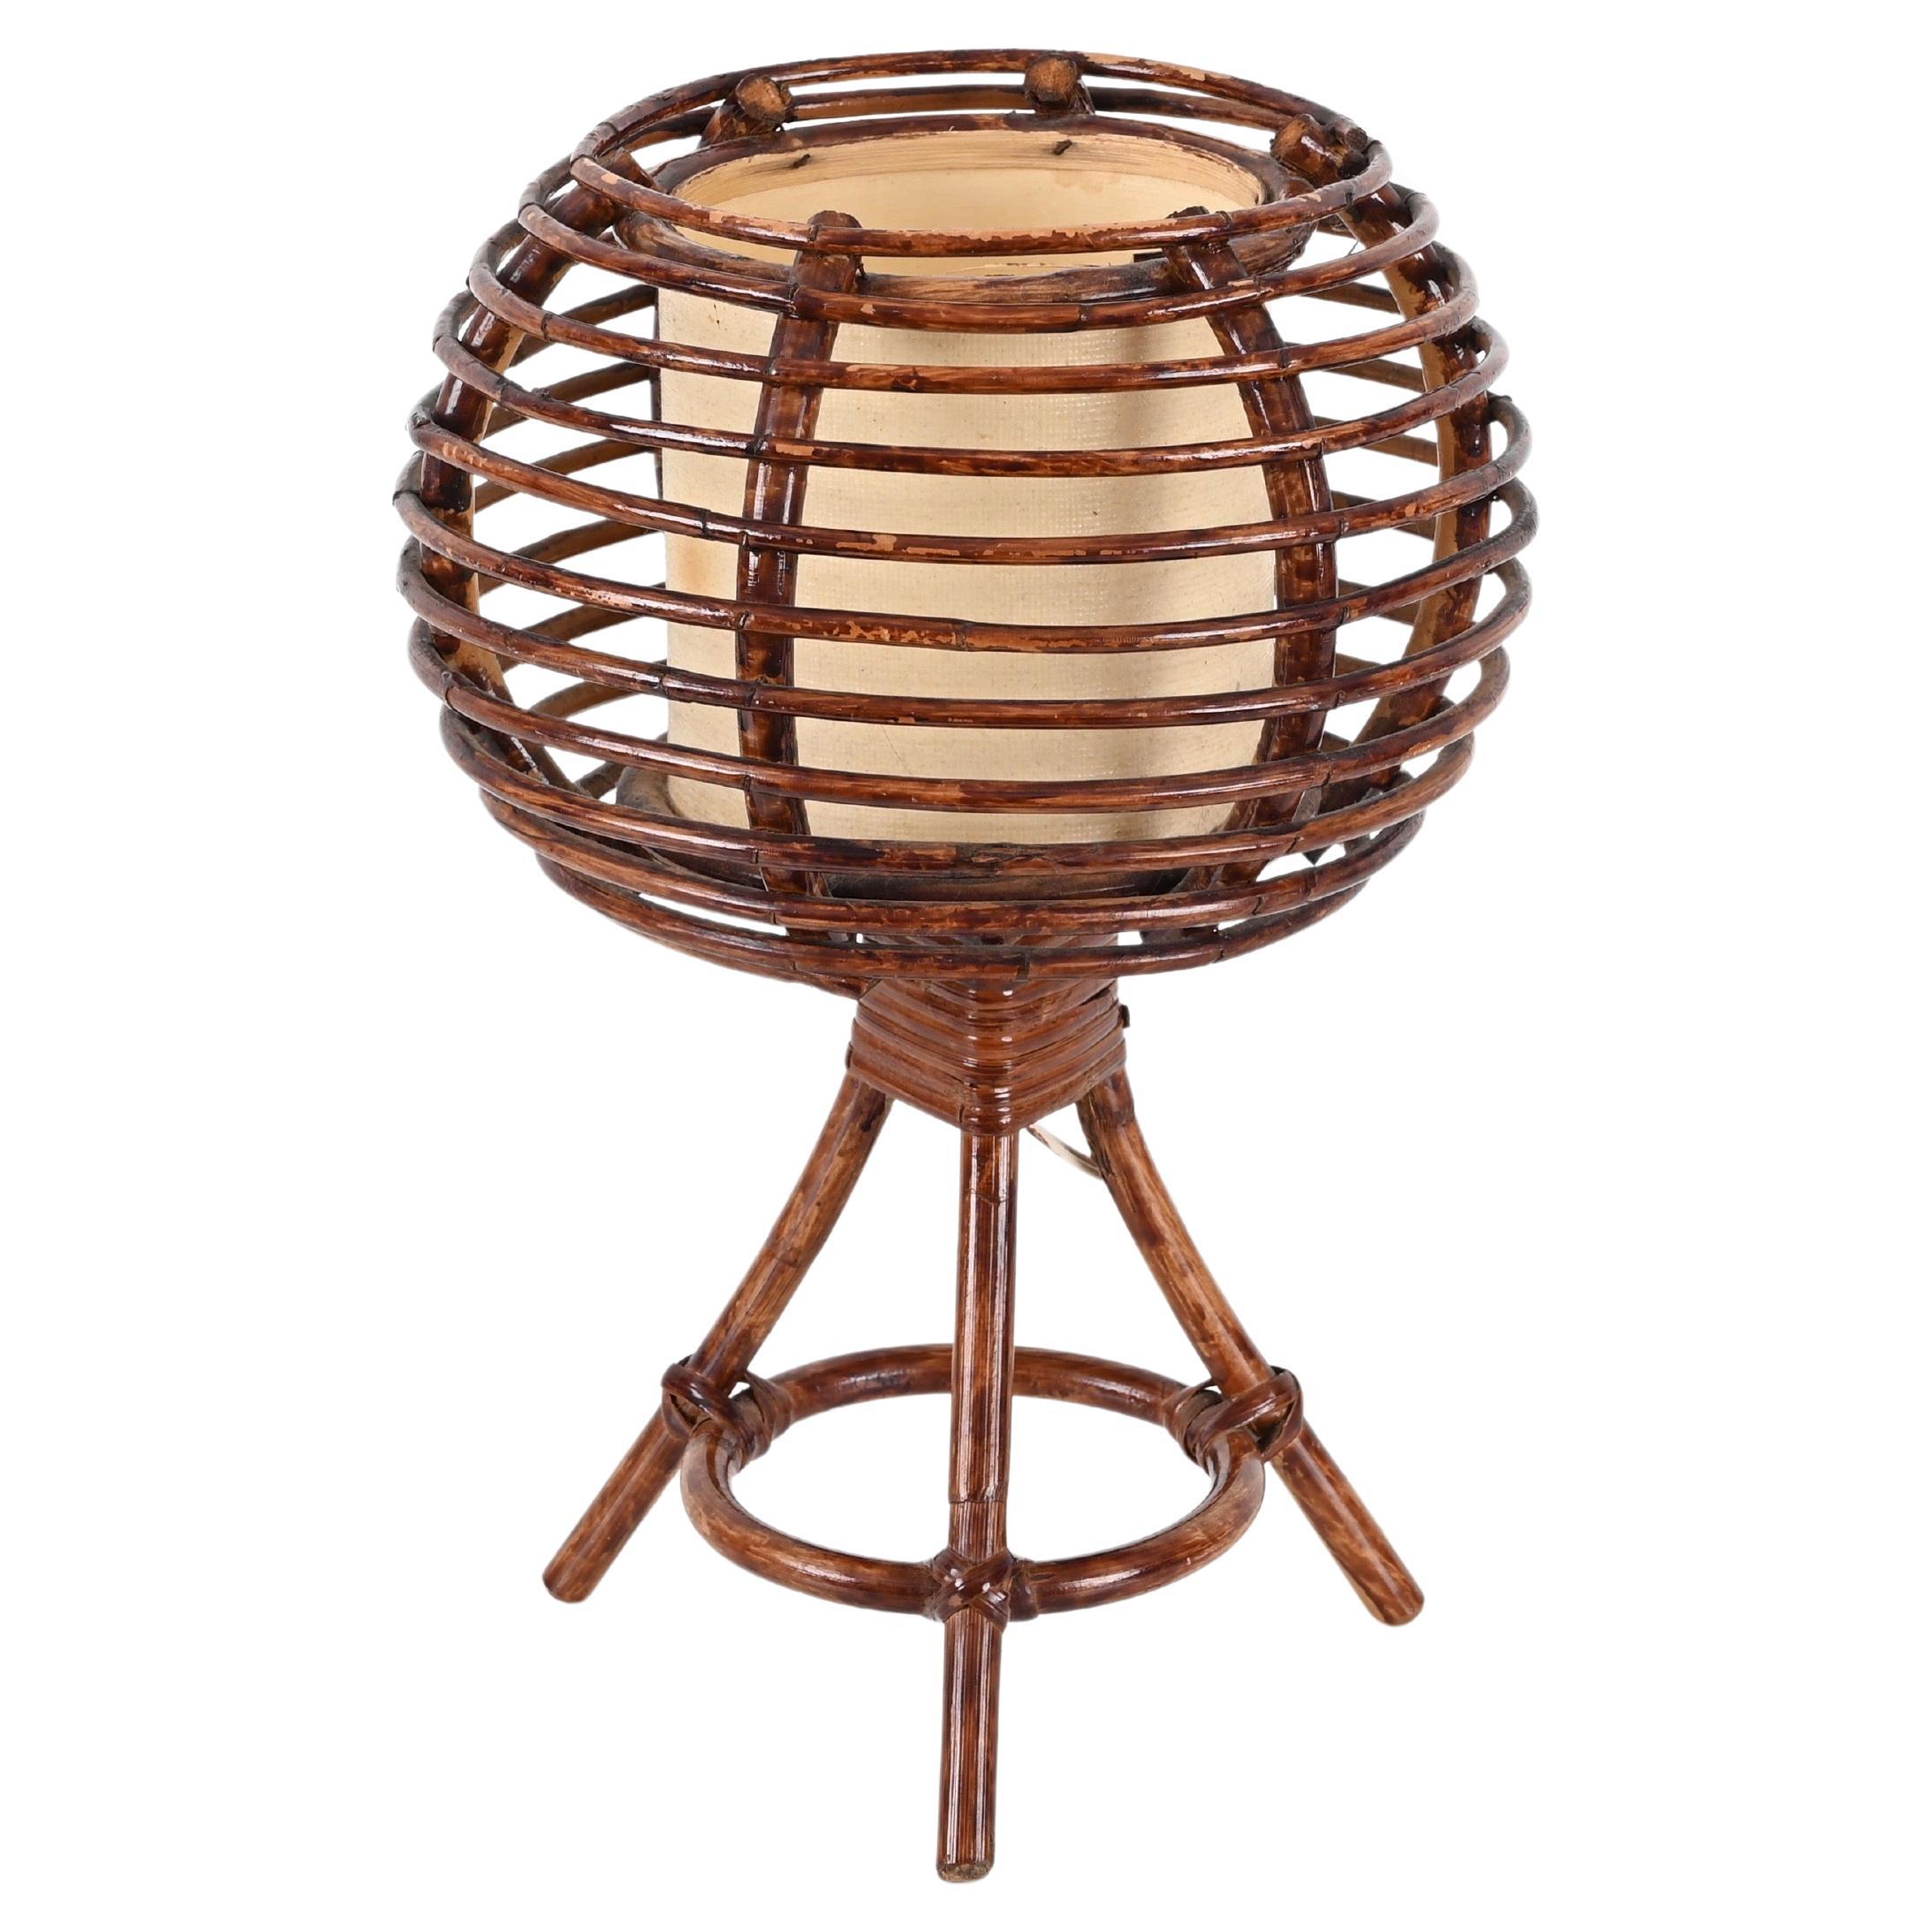 Louis Sognot Round Table Lamp in Rattan, Wicker, Beige Lampshade, France 1960s